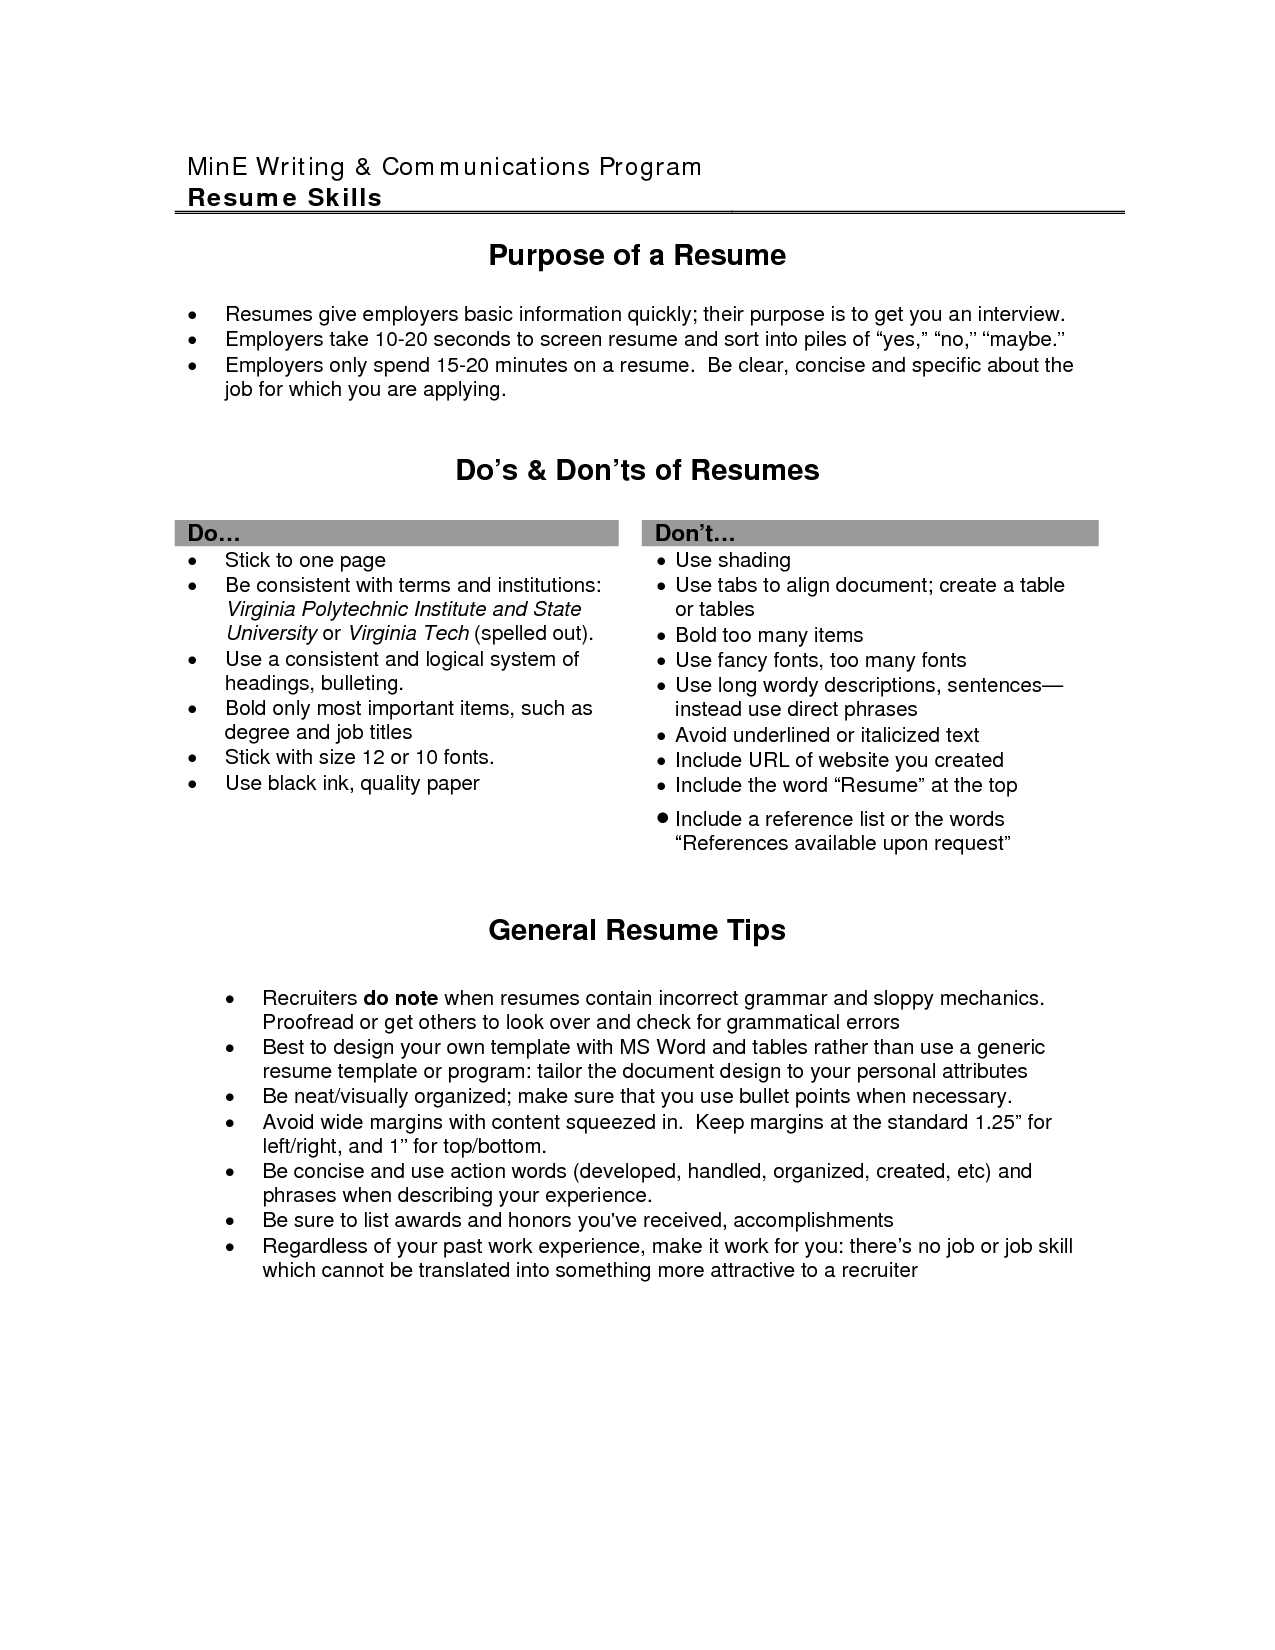 Examples Of Objectives For Resumes Writing A Great Objective For Resume Good Objective Resume Yeni Mescale Objectives Resumes Your Outline Free Examples Blank Template Wizard Nice Effective Layout Pr examples of objectives for resumes|wikiresume.com